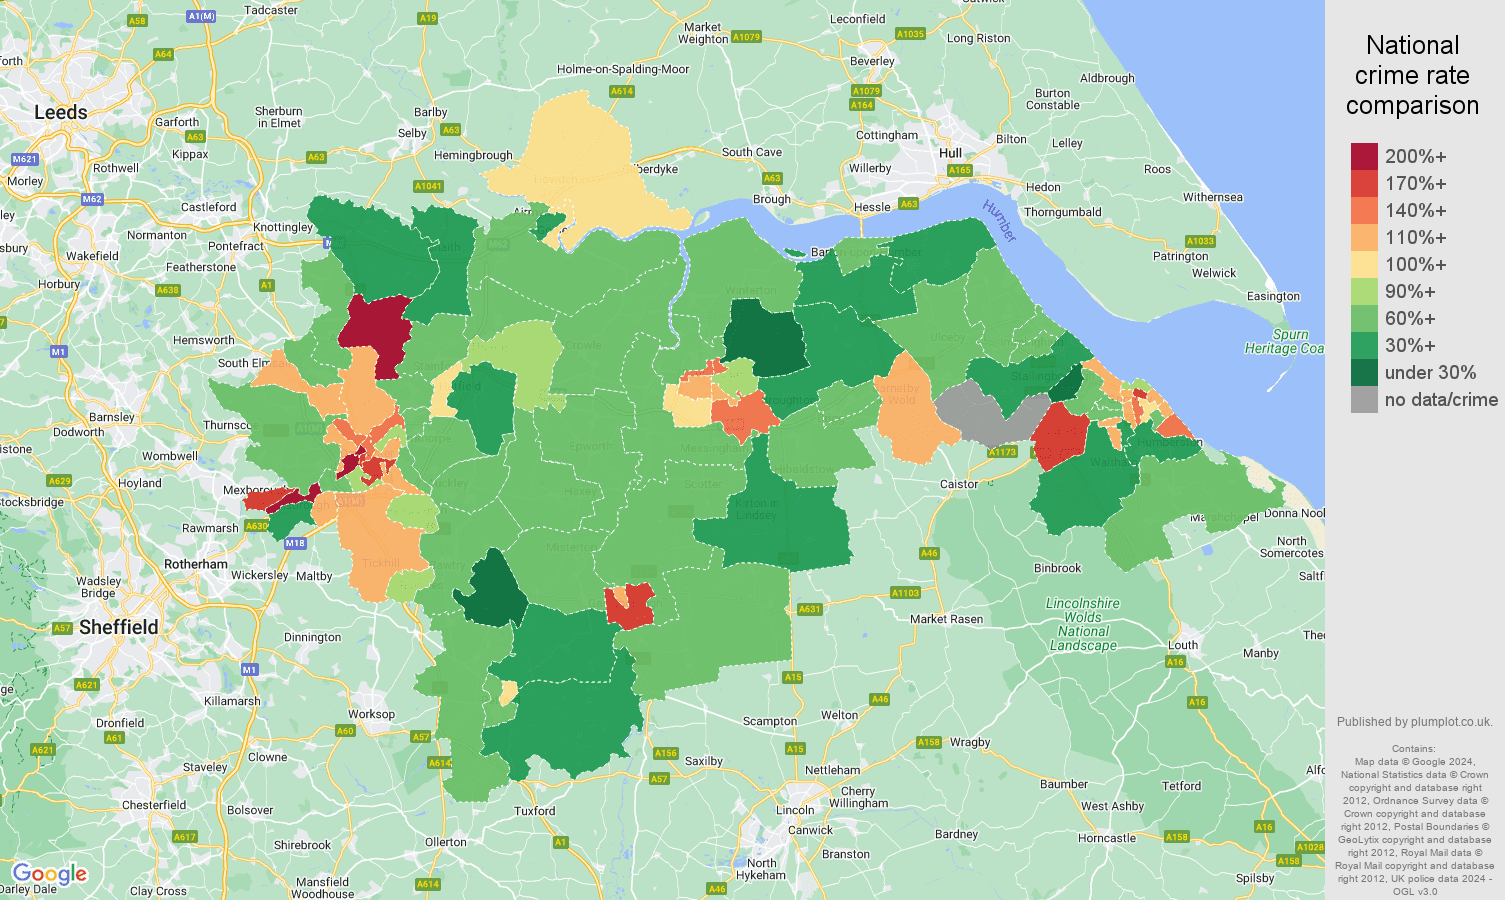 Doncaster other theft crime rate comparison map